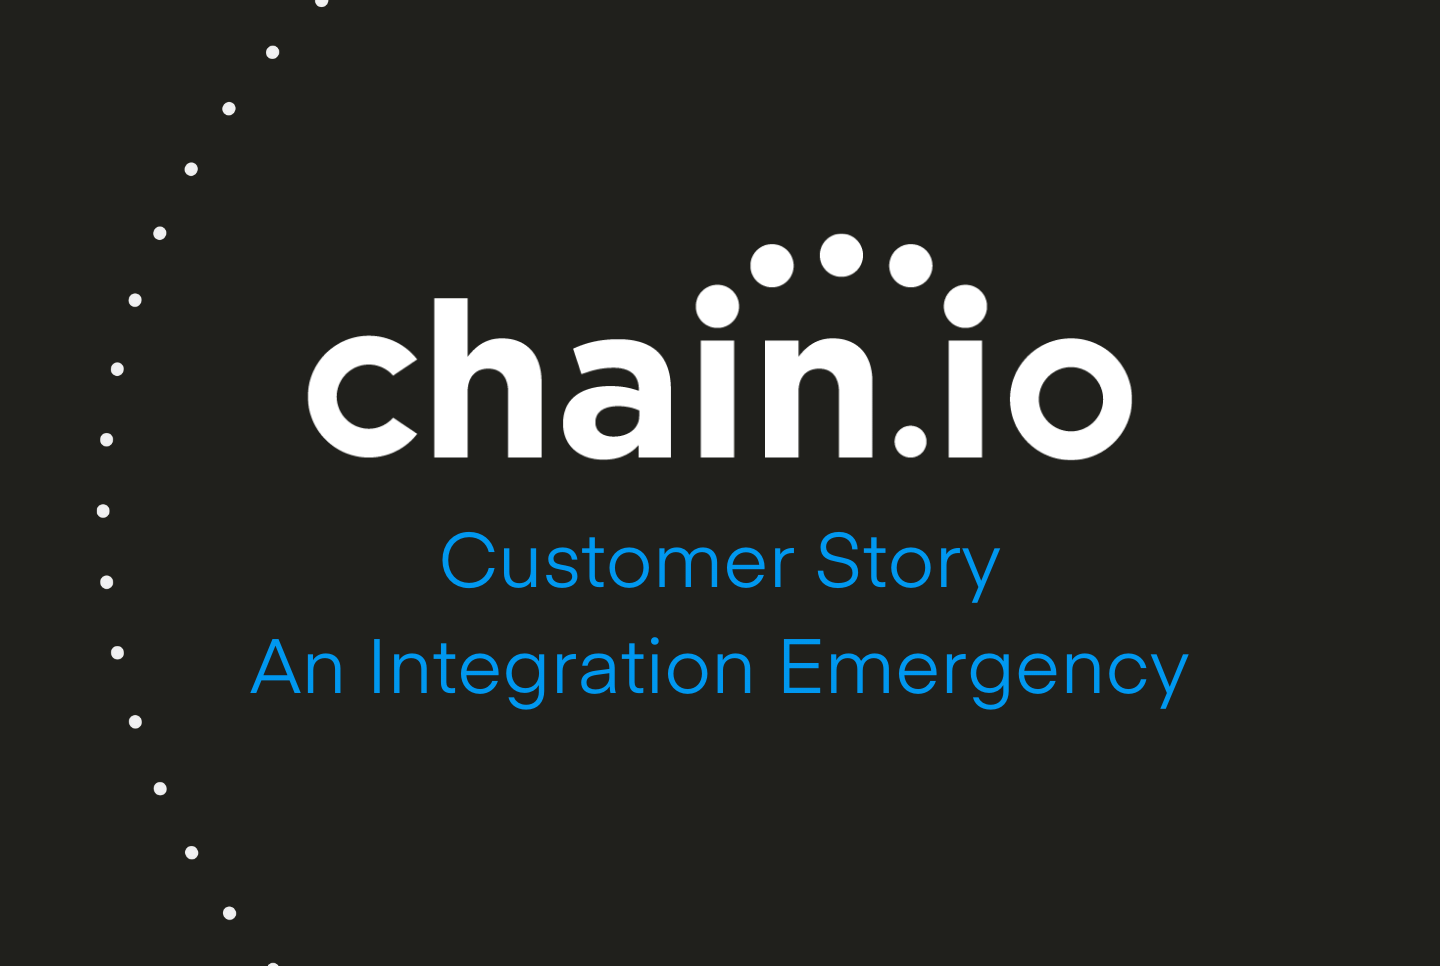 A customer is stuck between an old, inflexible system and disappointing their CEO. Chain.io to the rescue!